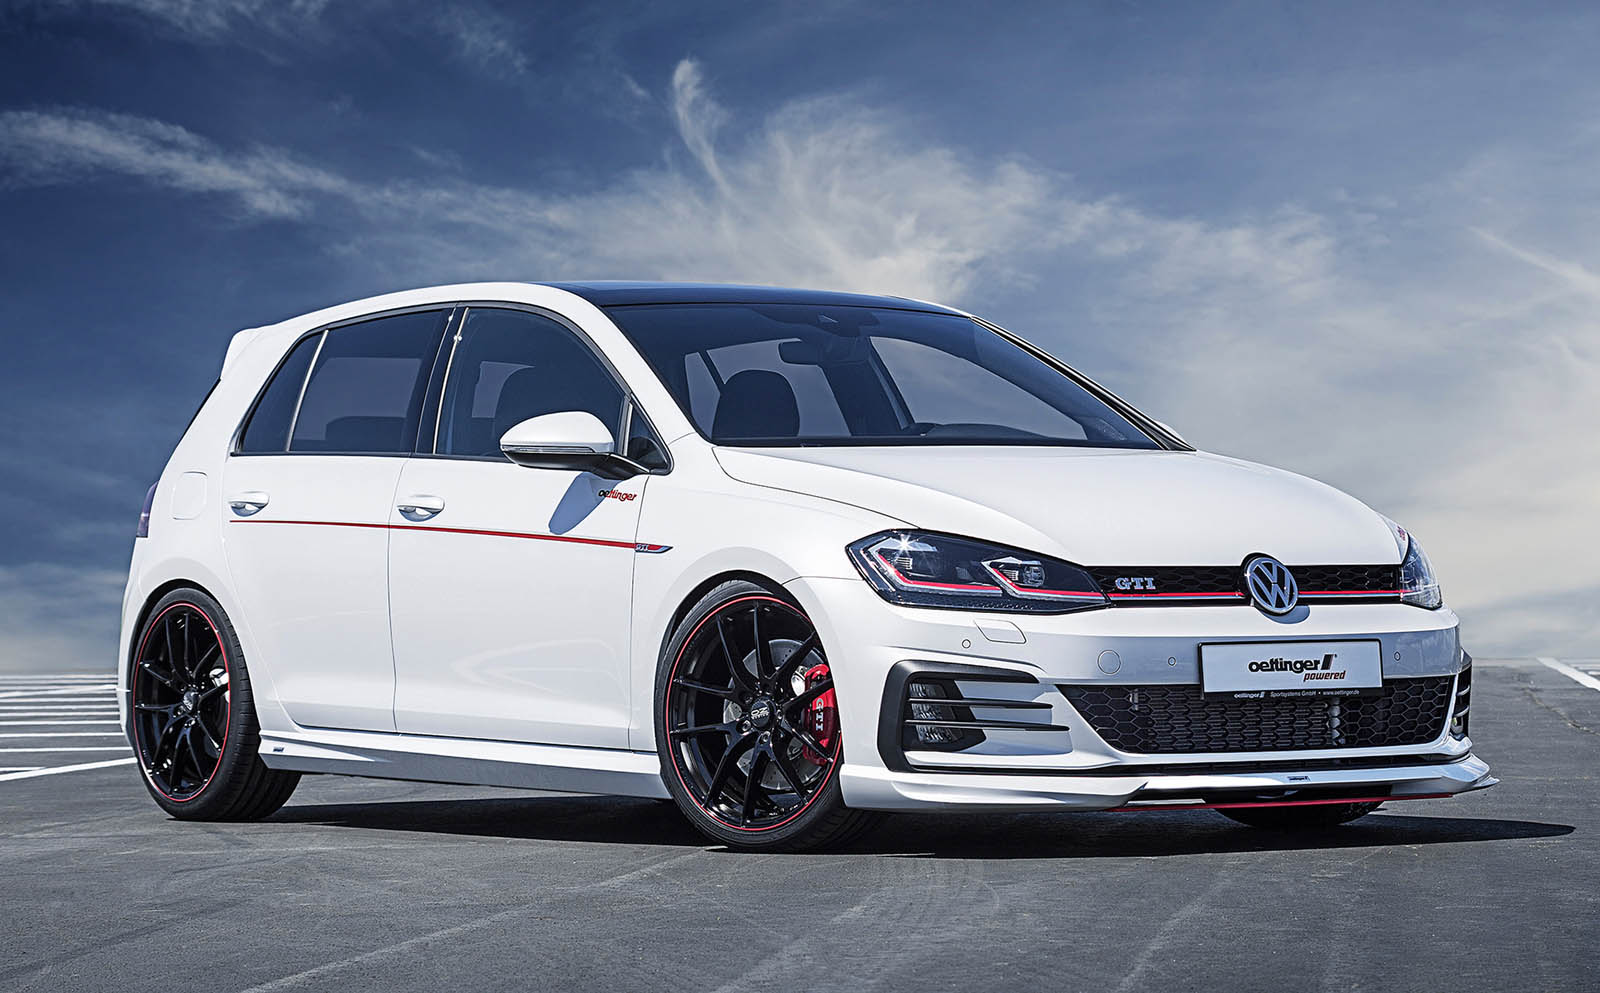 Oettinger Goes Worthersee With Comprehensive Golf GTI/R Upgrades